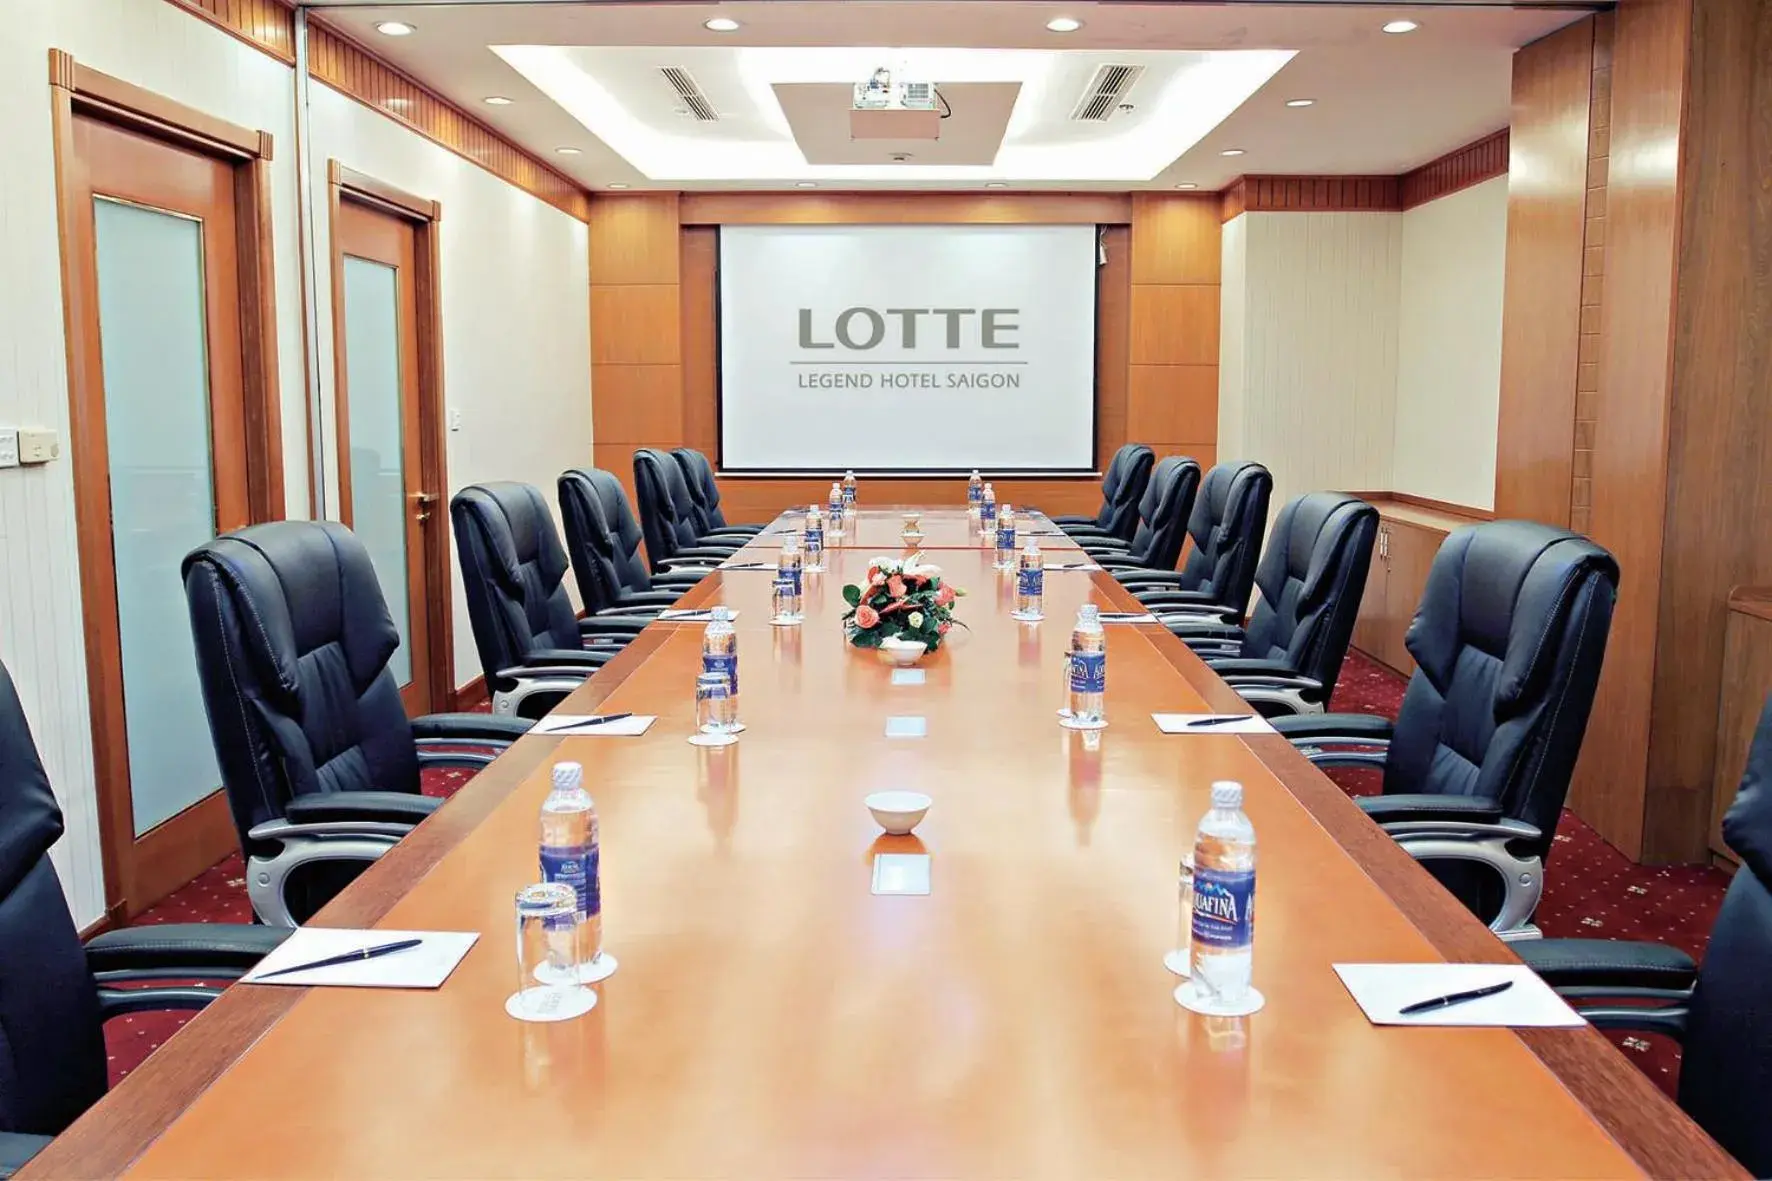 Meeting/conference room, Business Area/Conference Room in Lotte Hotel Saigon